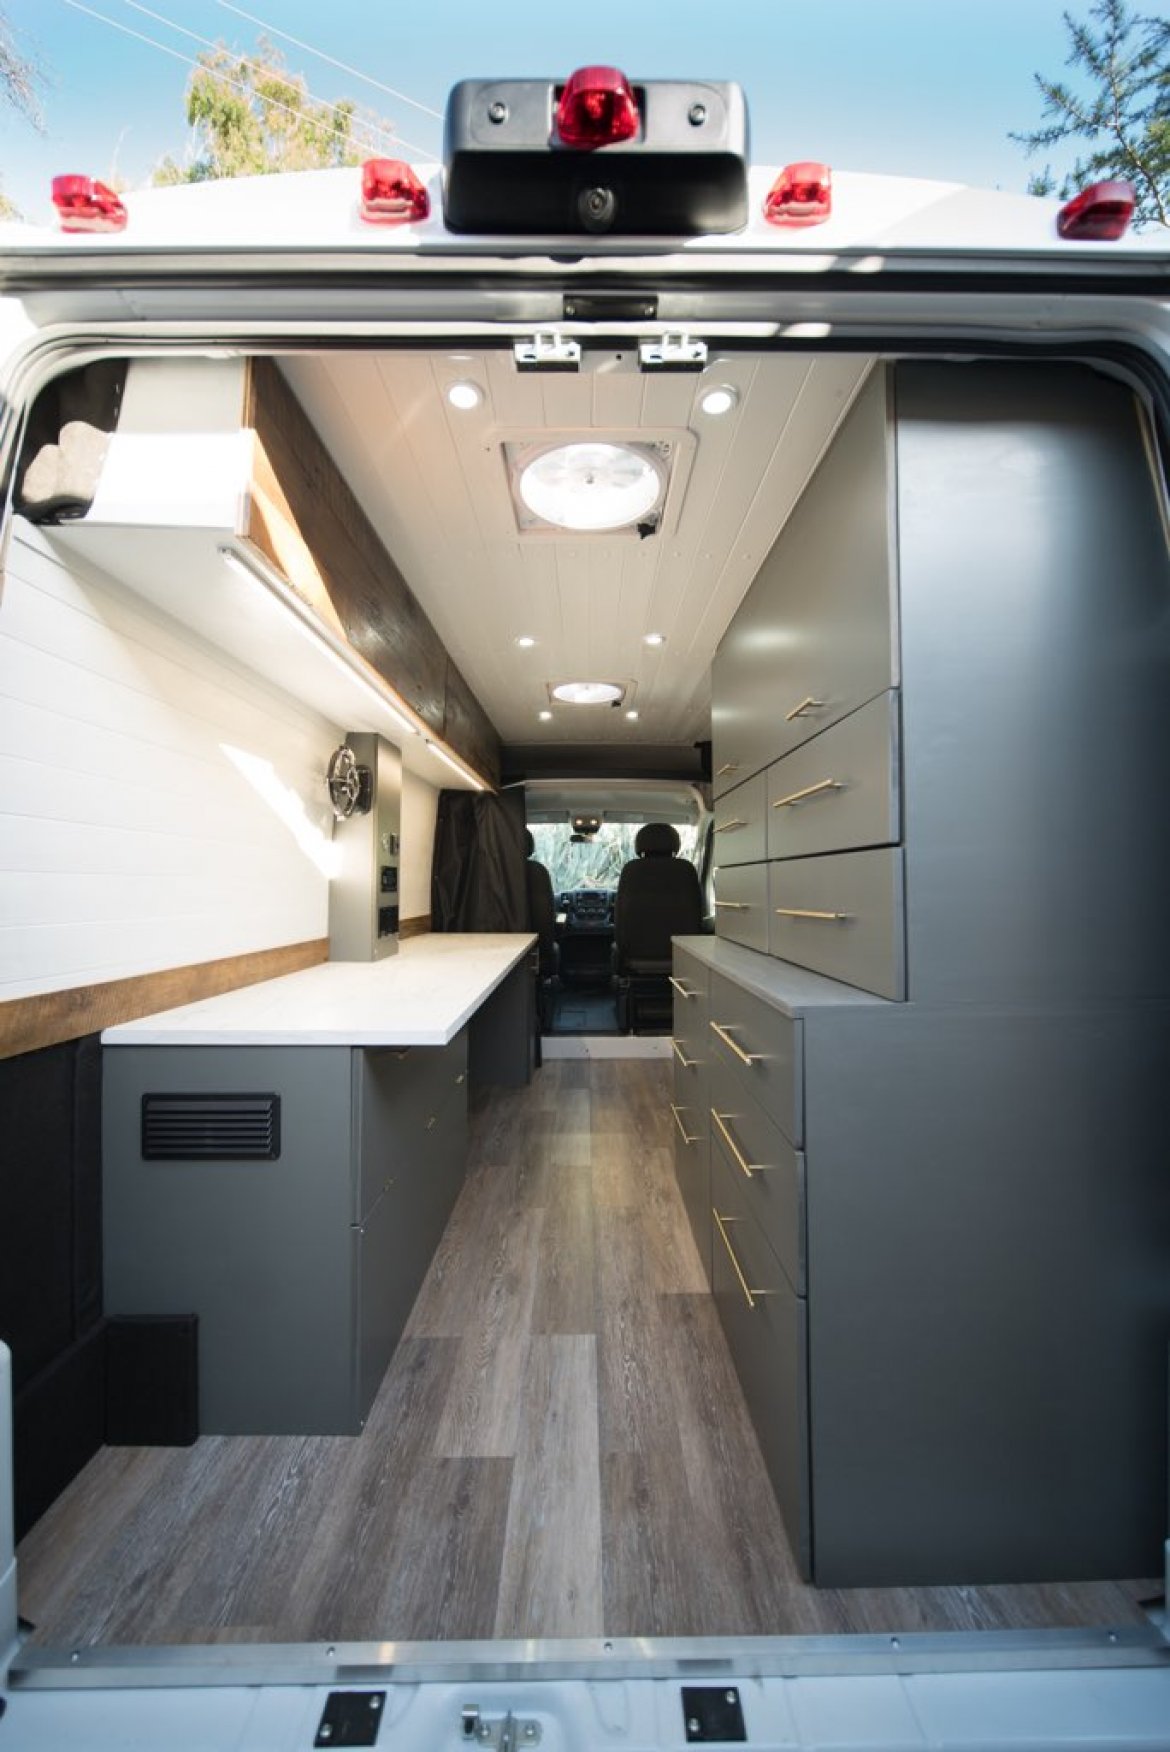 CEO SUV Mobile Office for sale: 2019 Dodge RAM pro master 1500 highroof by Custom build